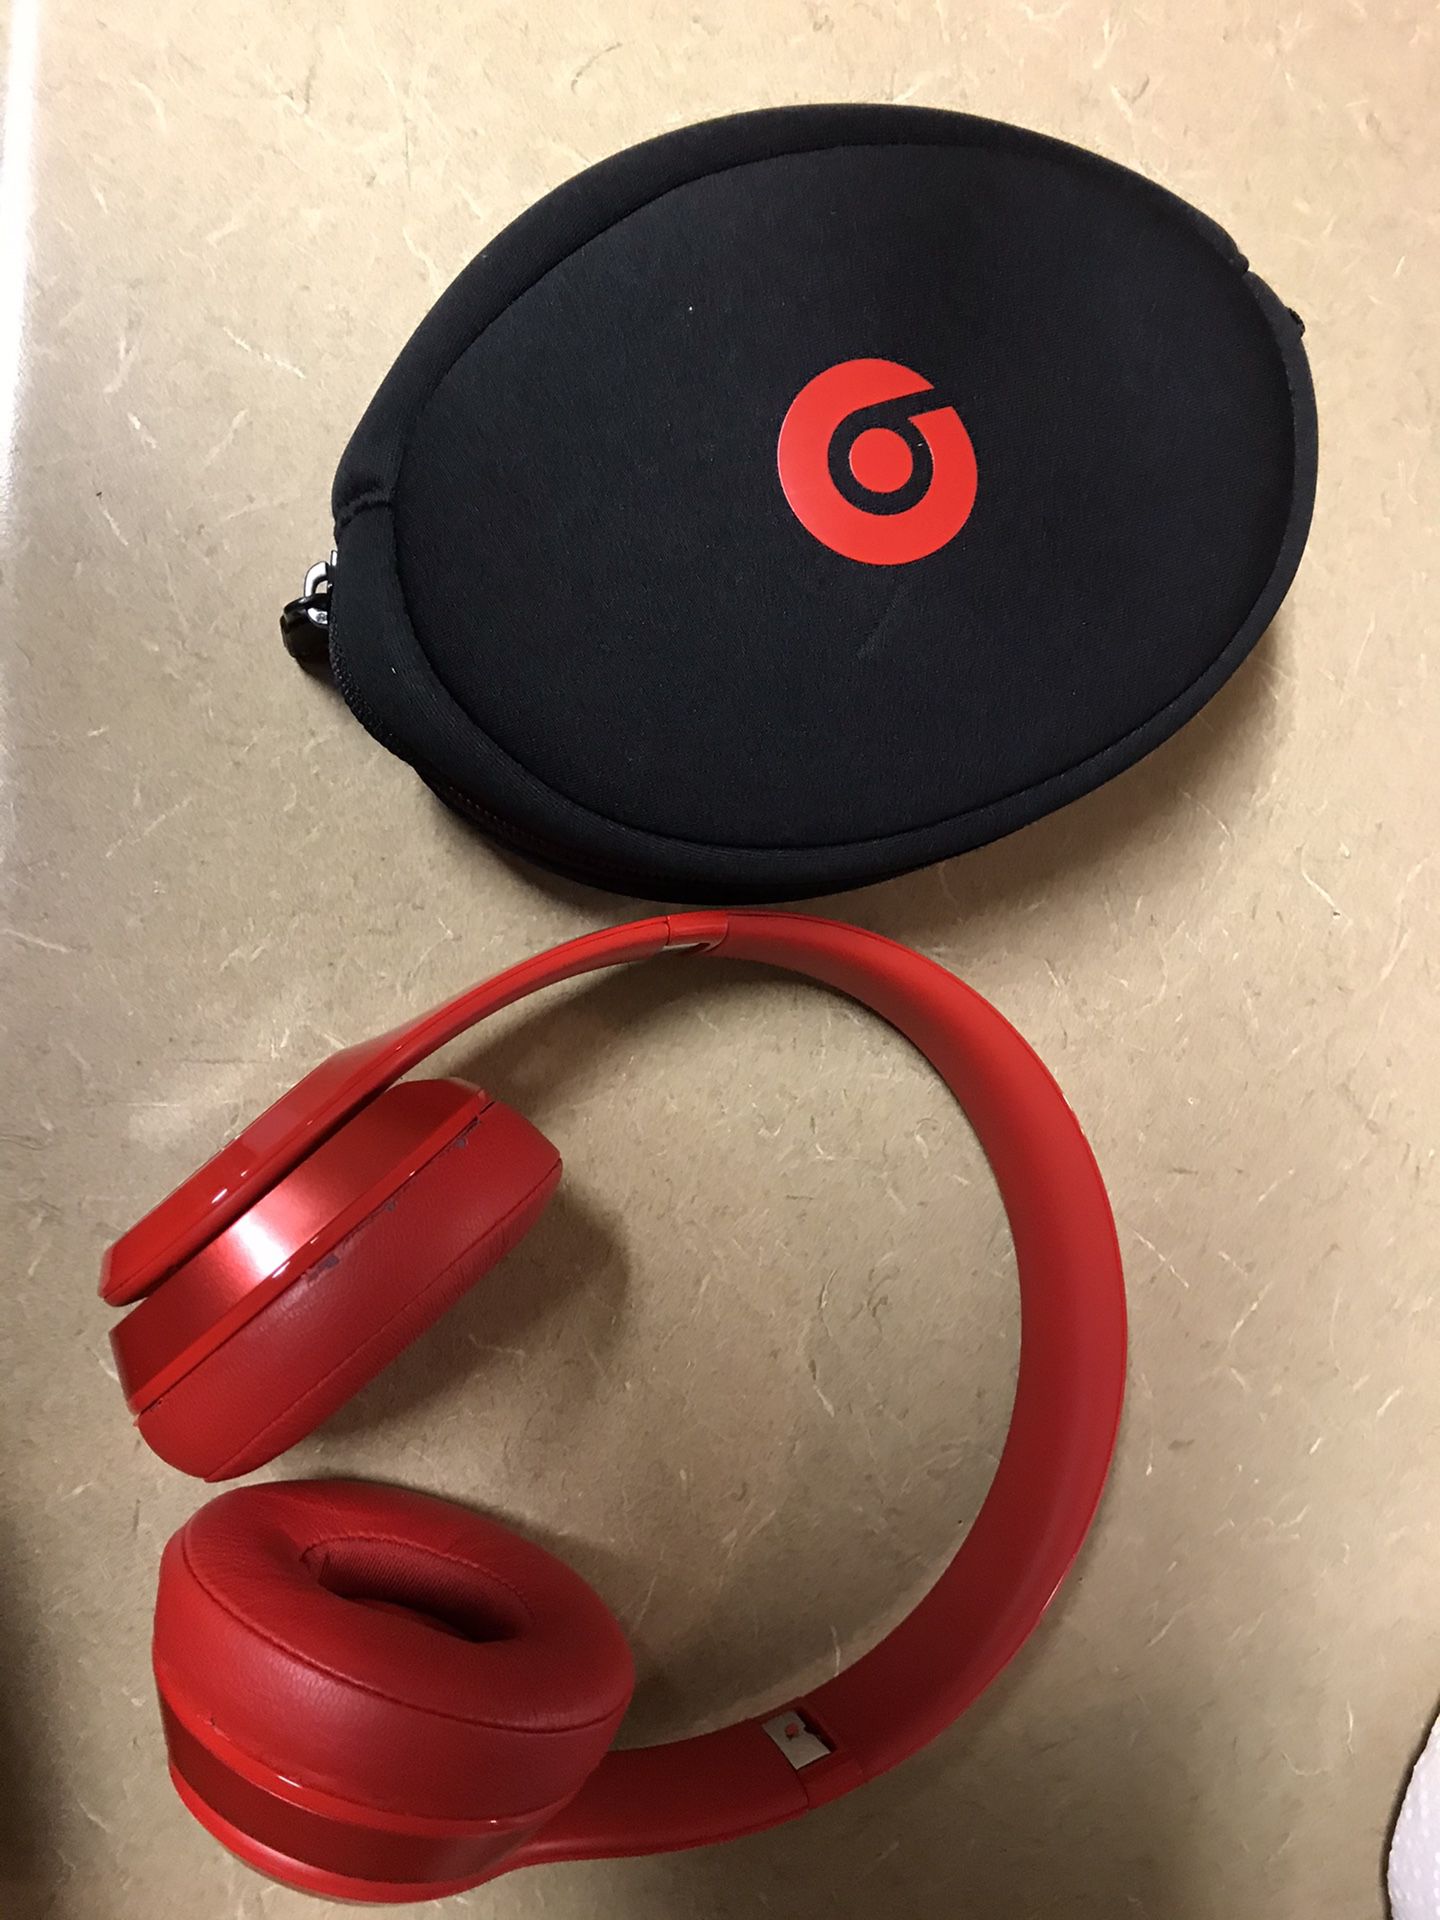 Red Beats solo wireless headphones with case